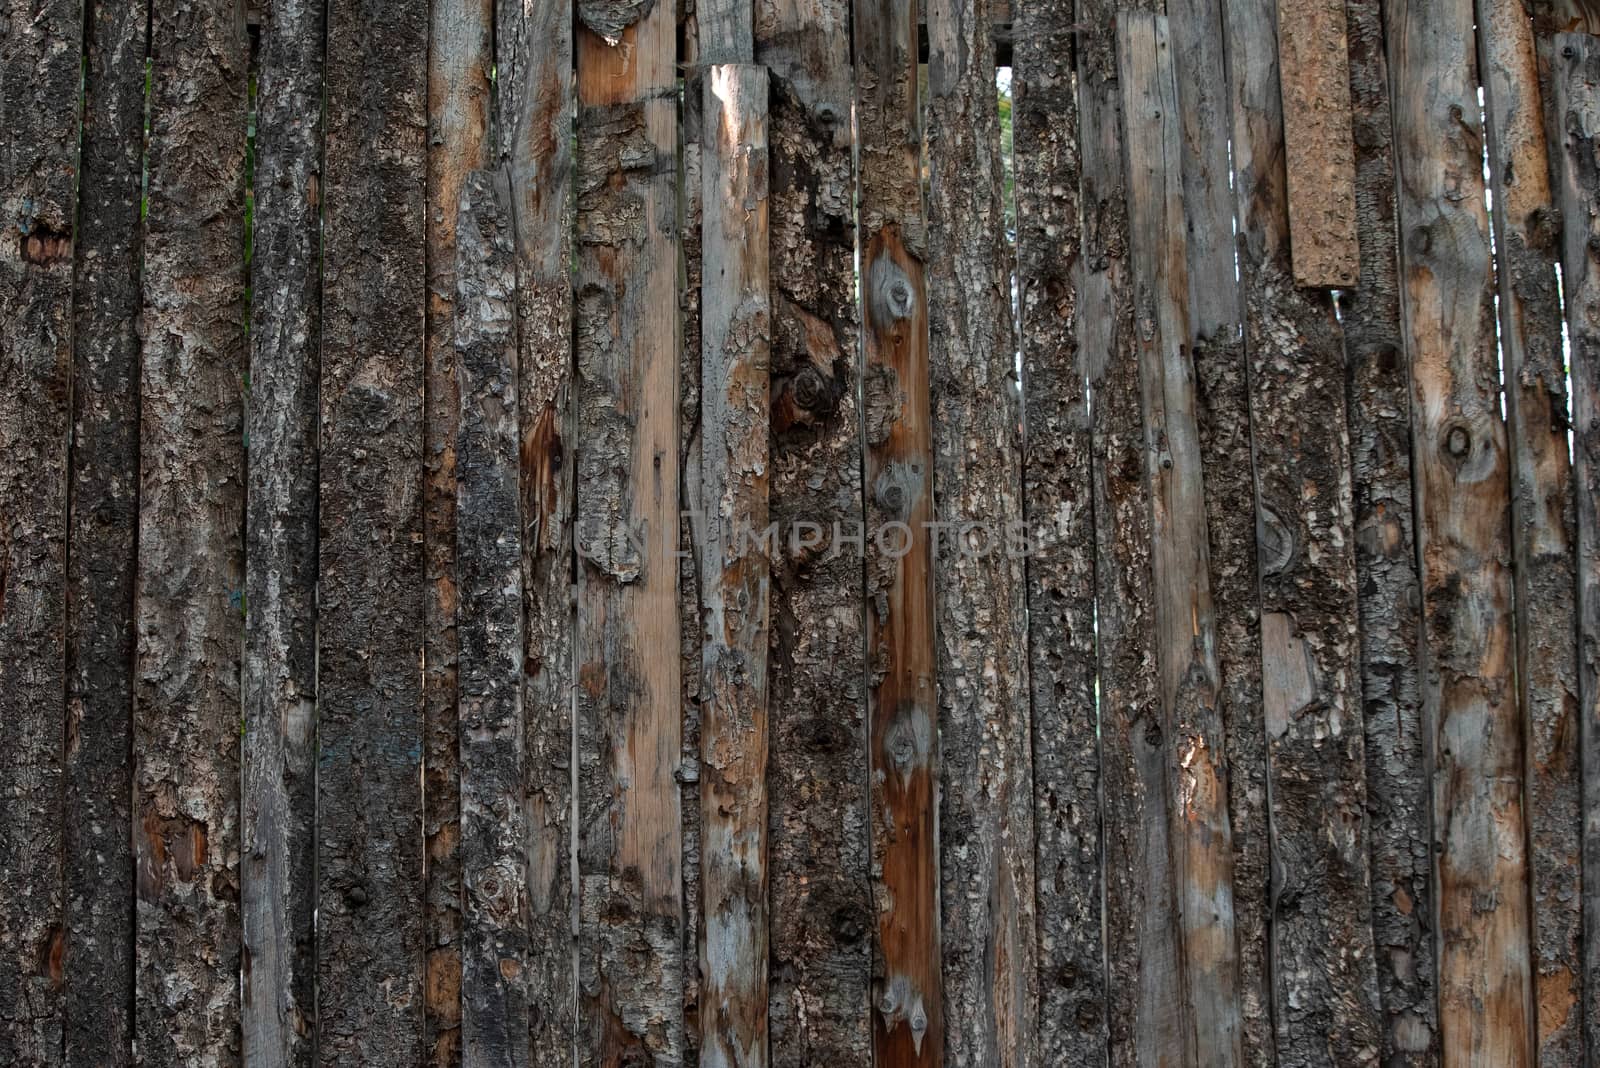 An old fence of textured wood.